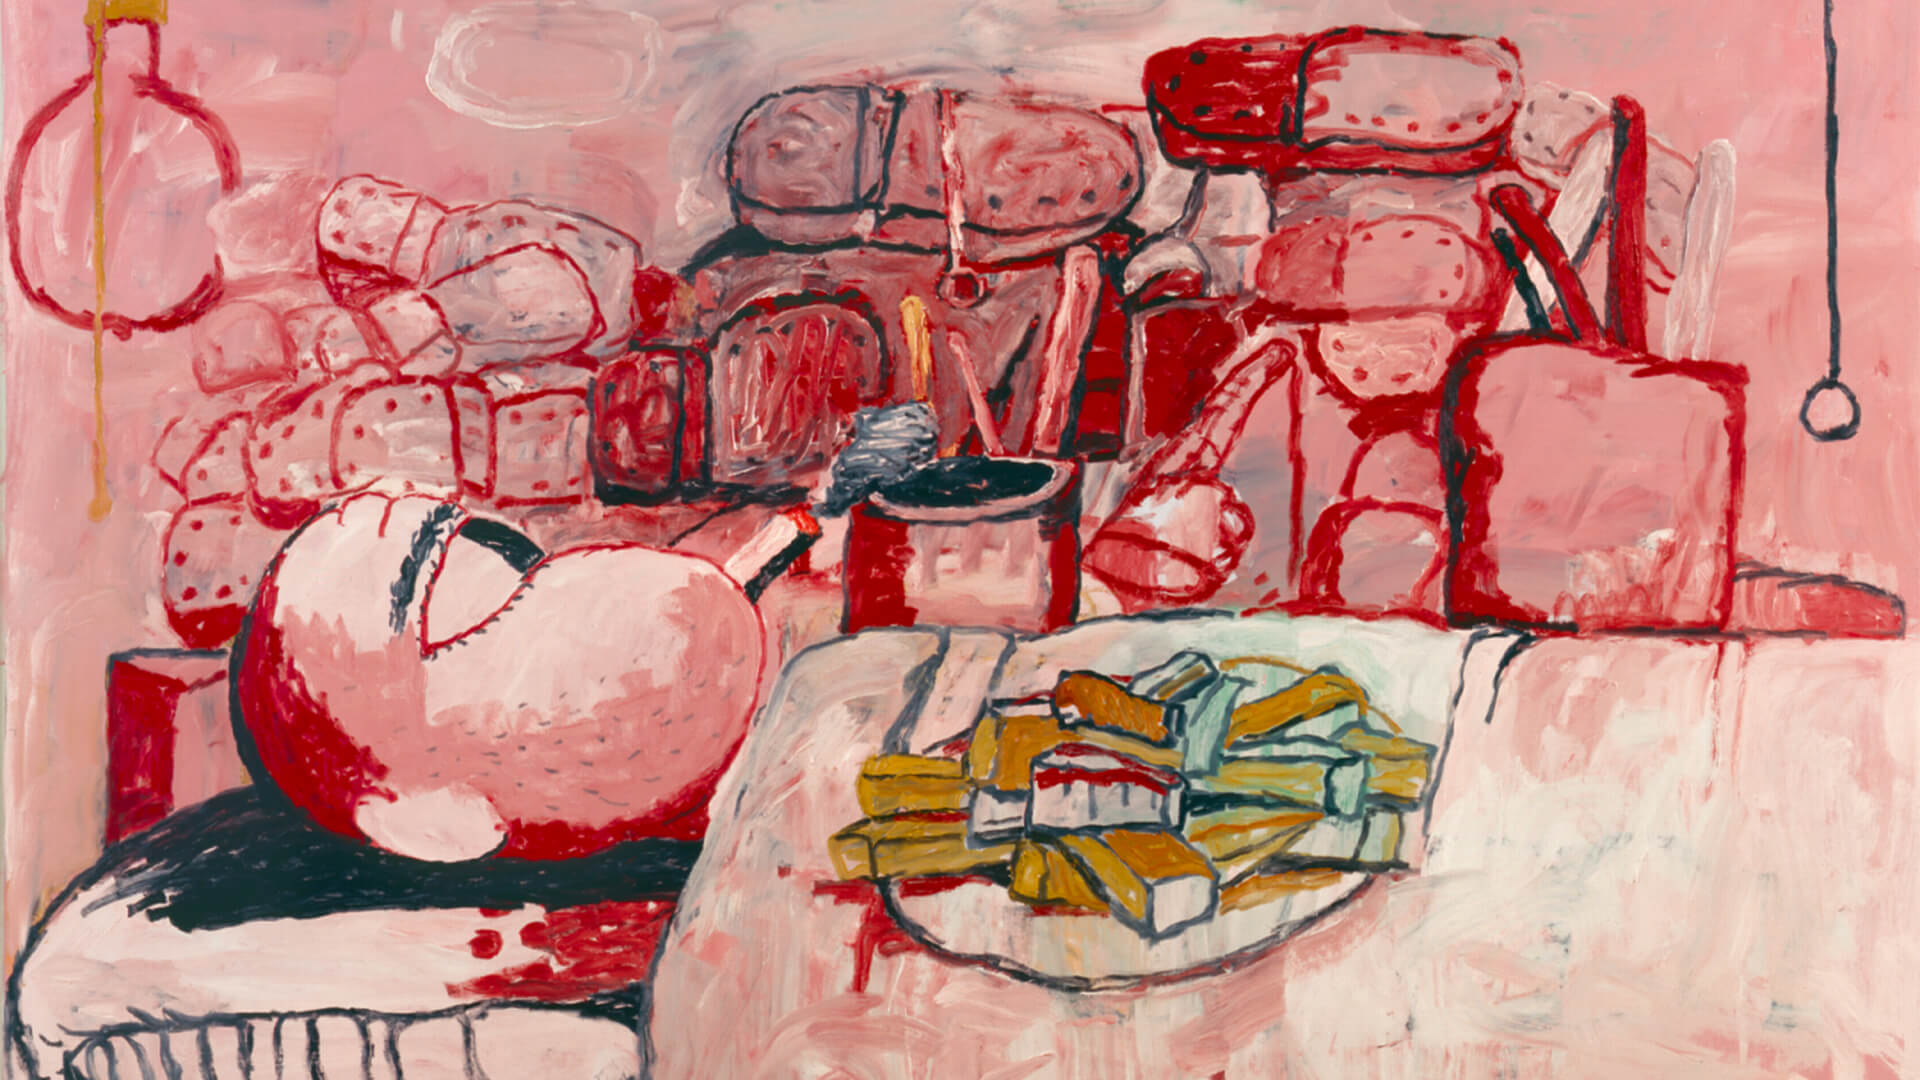 Washington, DC | Tour of “Philip Guston Now” at the National Gallery of Art with Nathalie Ryan